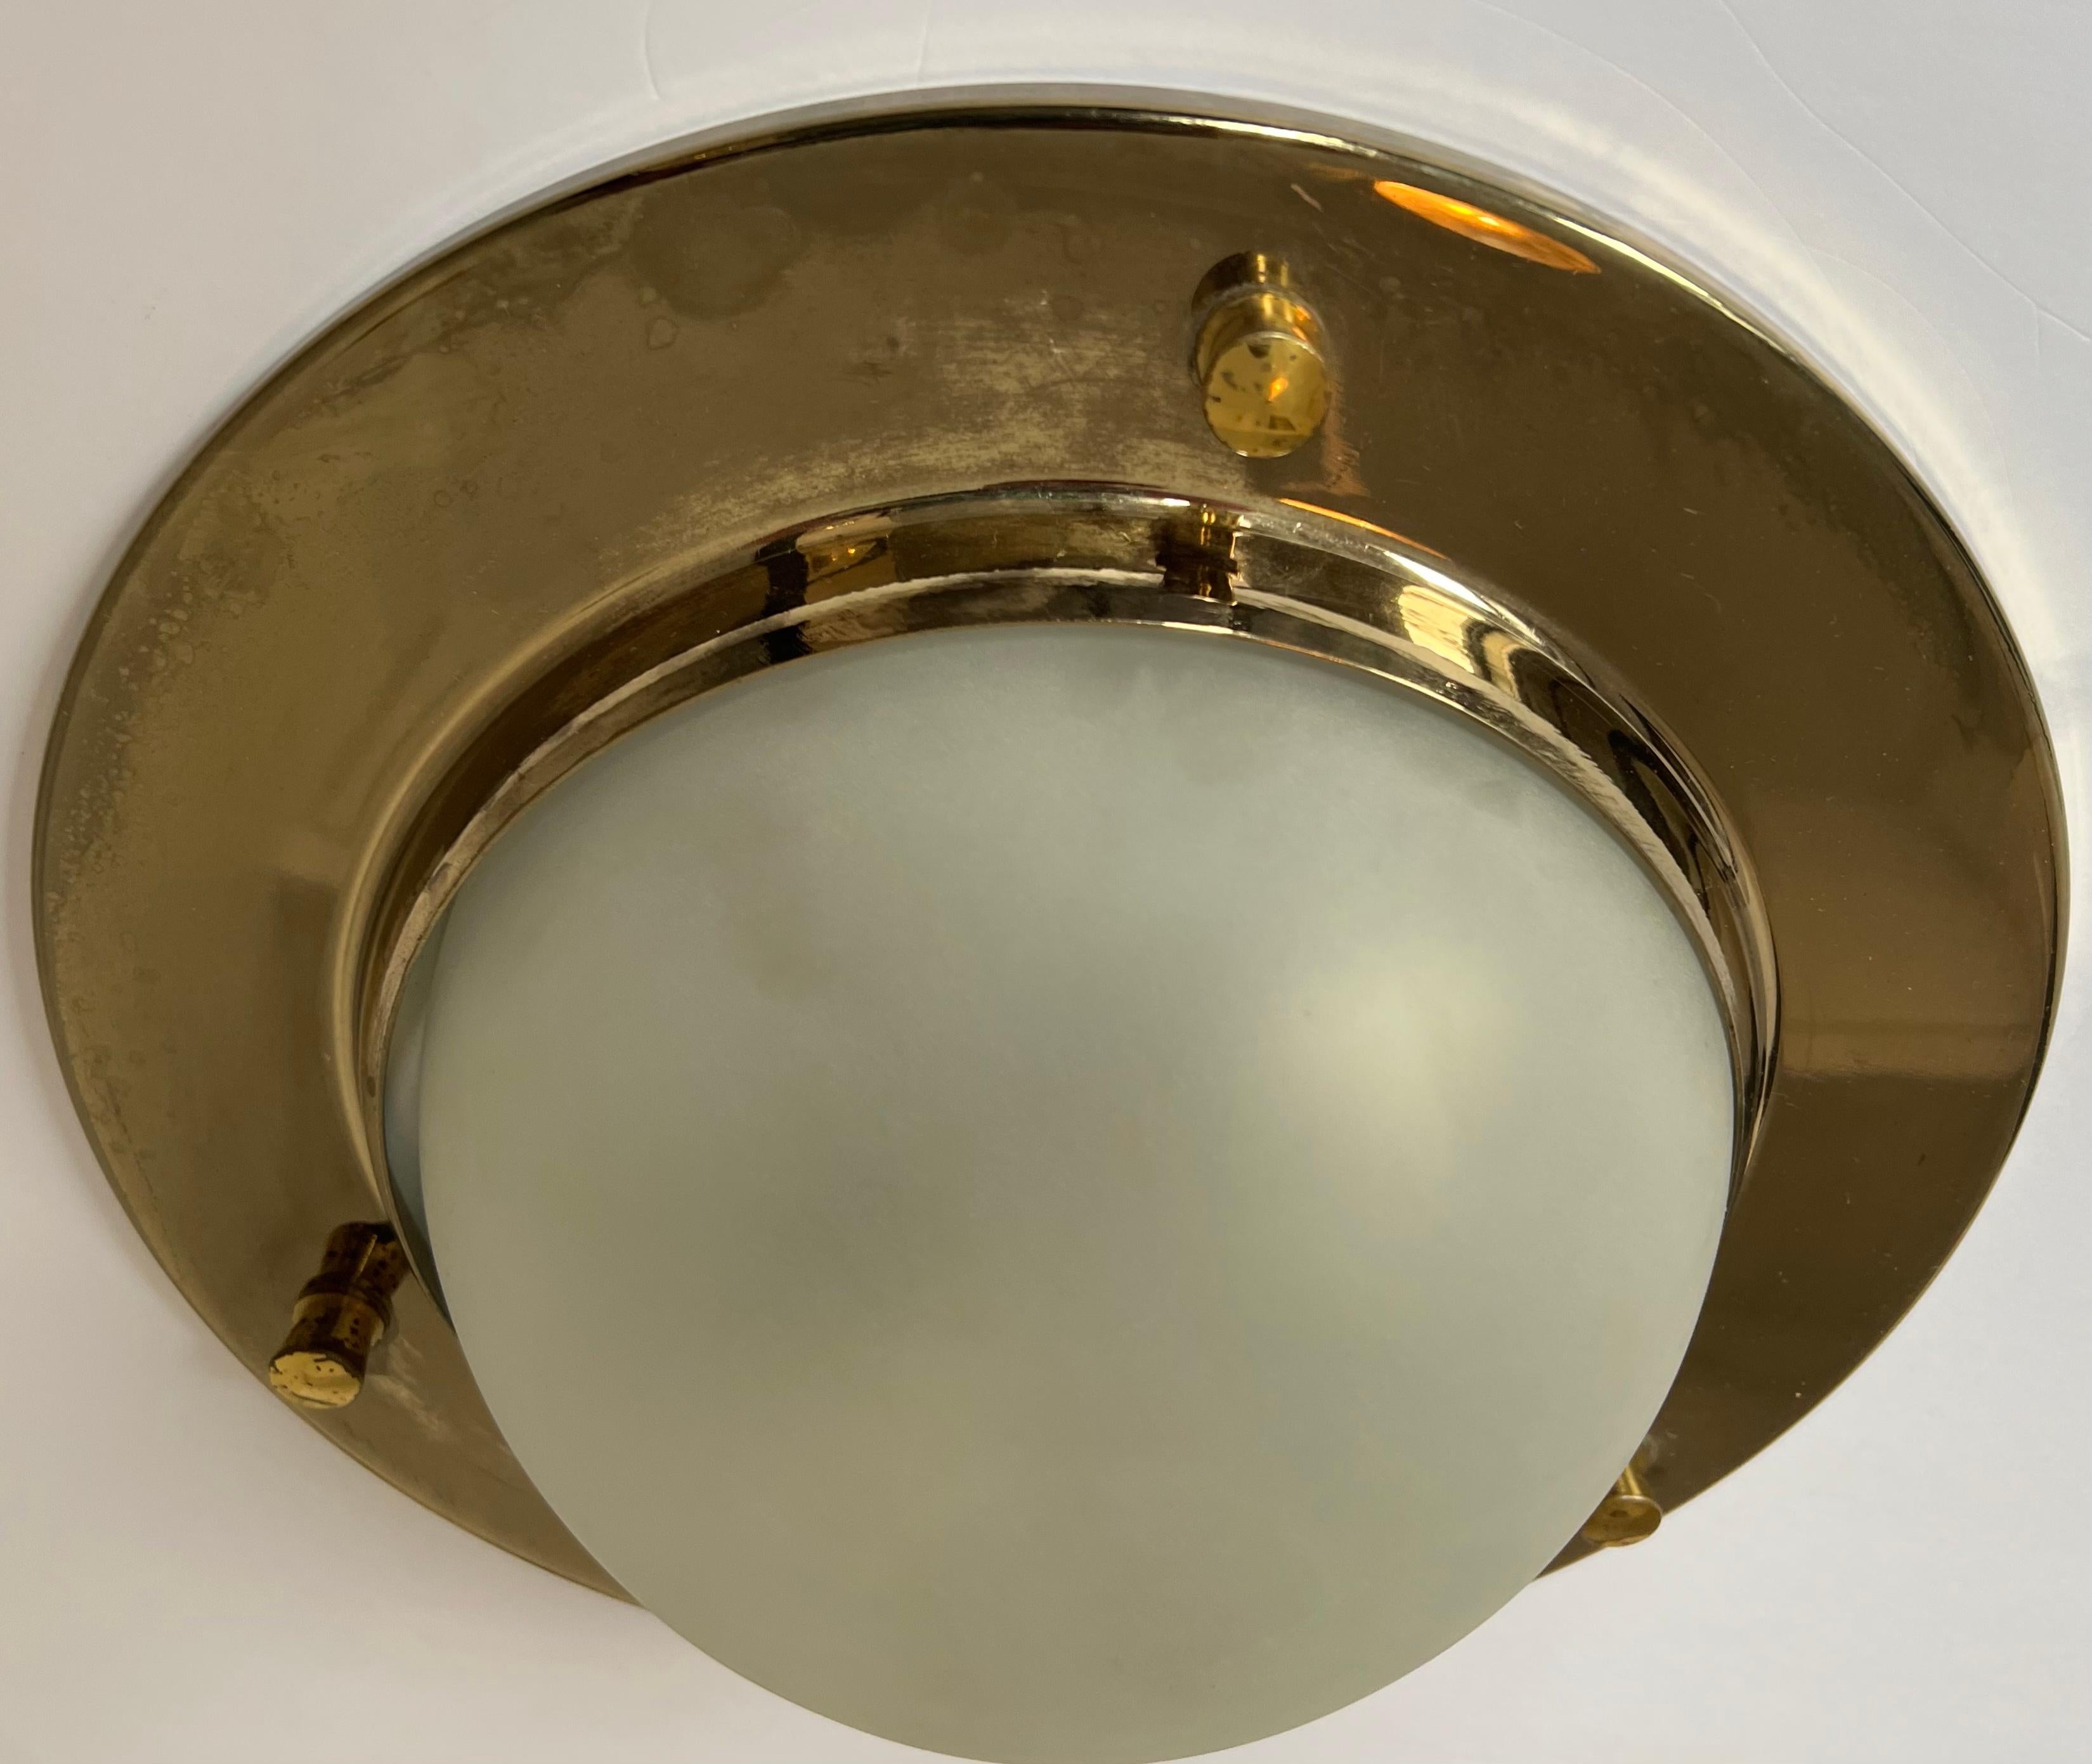 A 1960s Italian nautical style ceiling light in polished brass with a white glass shade. Rewired. Made by Azucena.